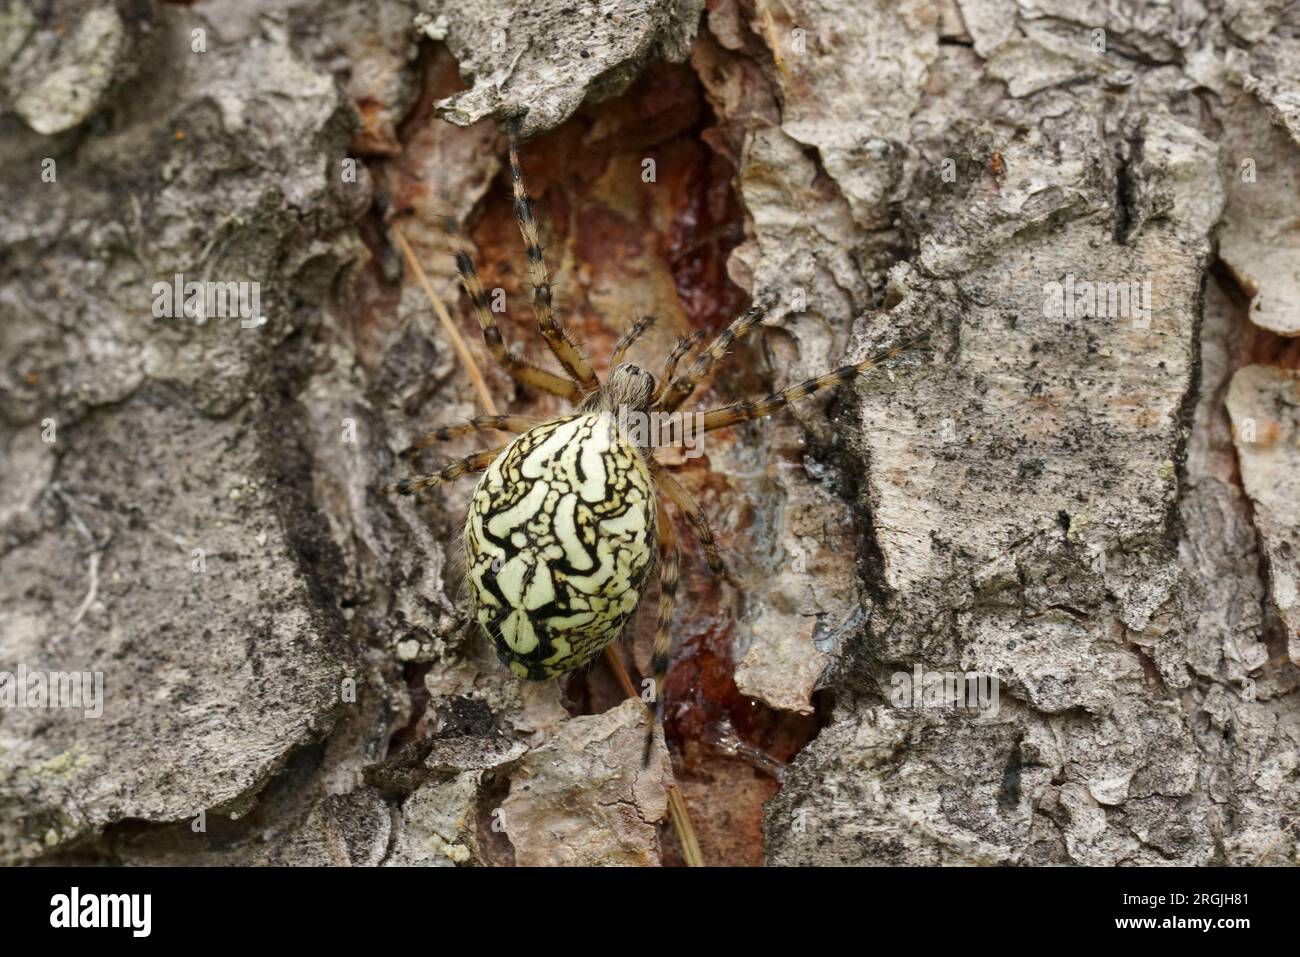 Natural closeup on a rare adult Oak spider, Aculepeira ceropegia,sitting on the bark of a pinetree Stock Photo